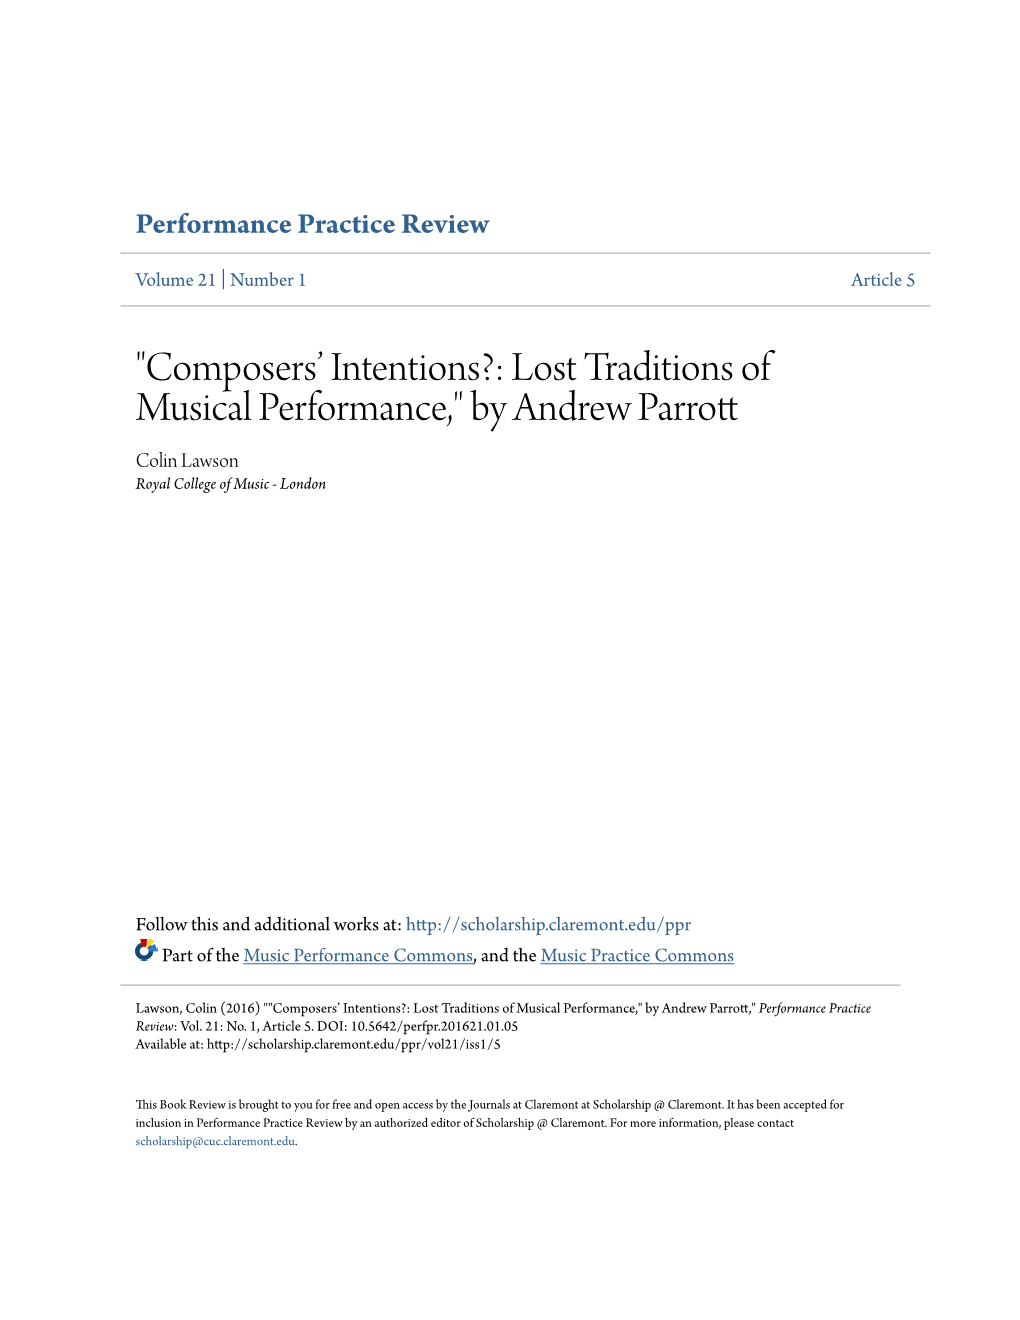 "Composers' Intentions?: Lost Traditions of Musical Performance," by Andrew Parrott